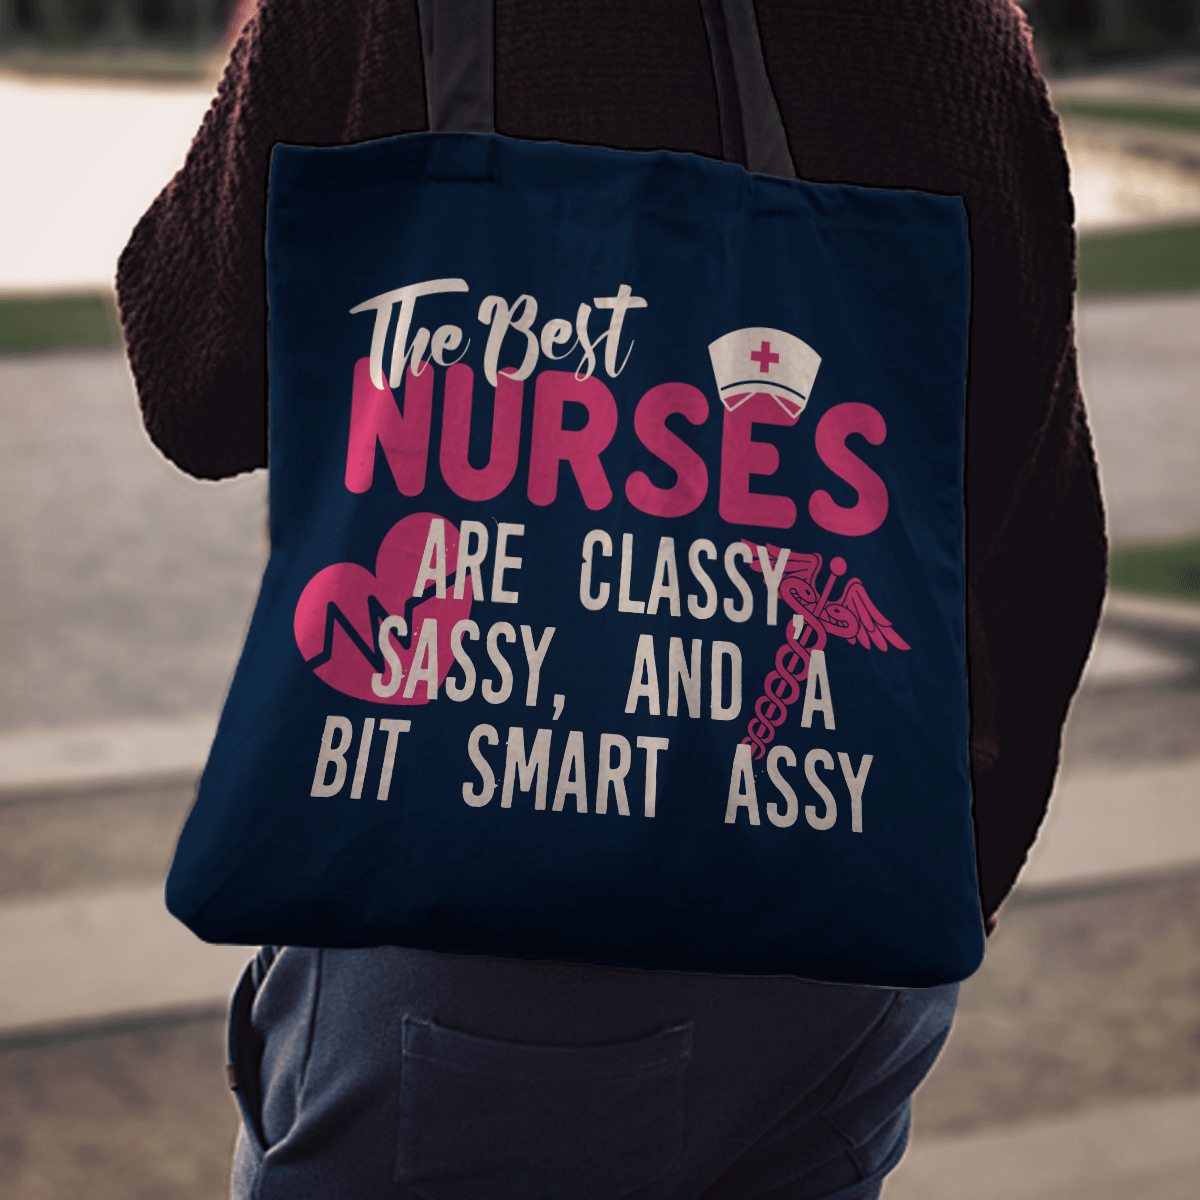 Designs by MyUtopia Shout Out:The Best Nurses are Classy Fabric Totebag Reusable Shopping Tote